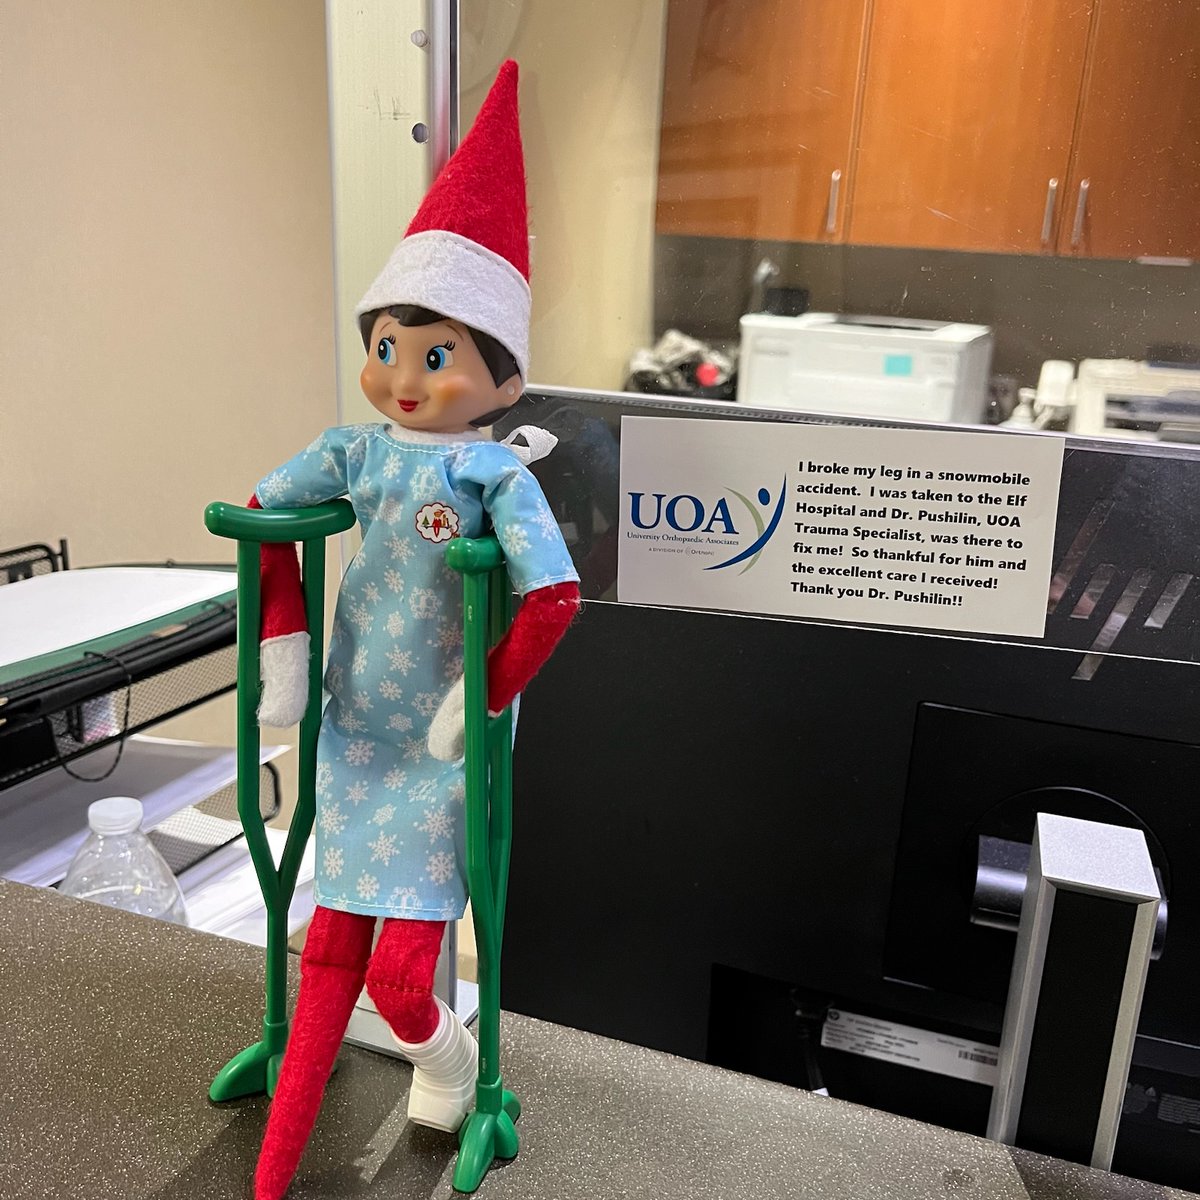 Who needs Santa's magic when you've got Dr. Pushilin? 🎅🛷👨‍⚕️ The Elf on the Shelf is grateful for this elf-saving hero for fixing her up after her snowmobile mishap! ❄️🦸‍♂️ #ElfTestimonial #MiracleWorker